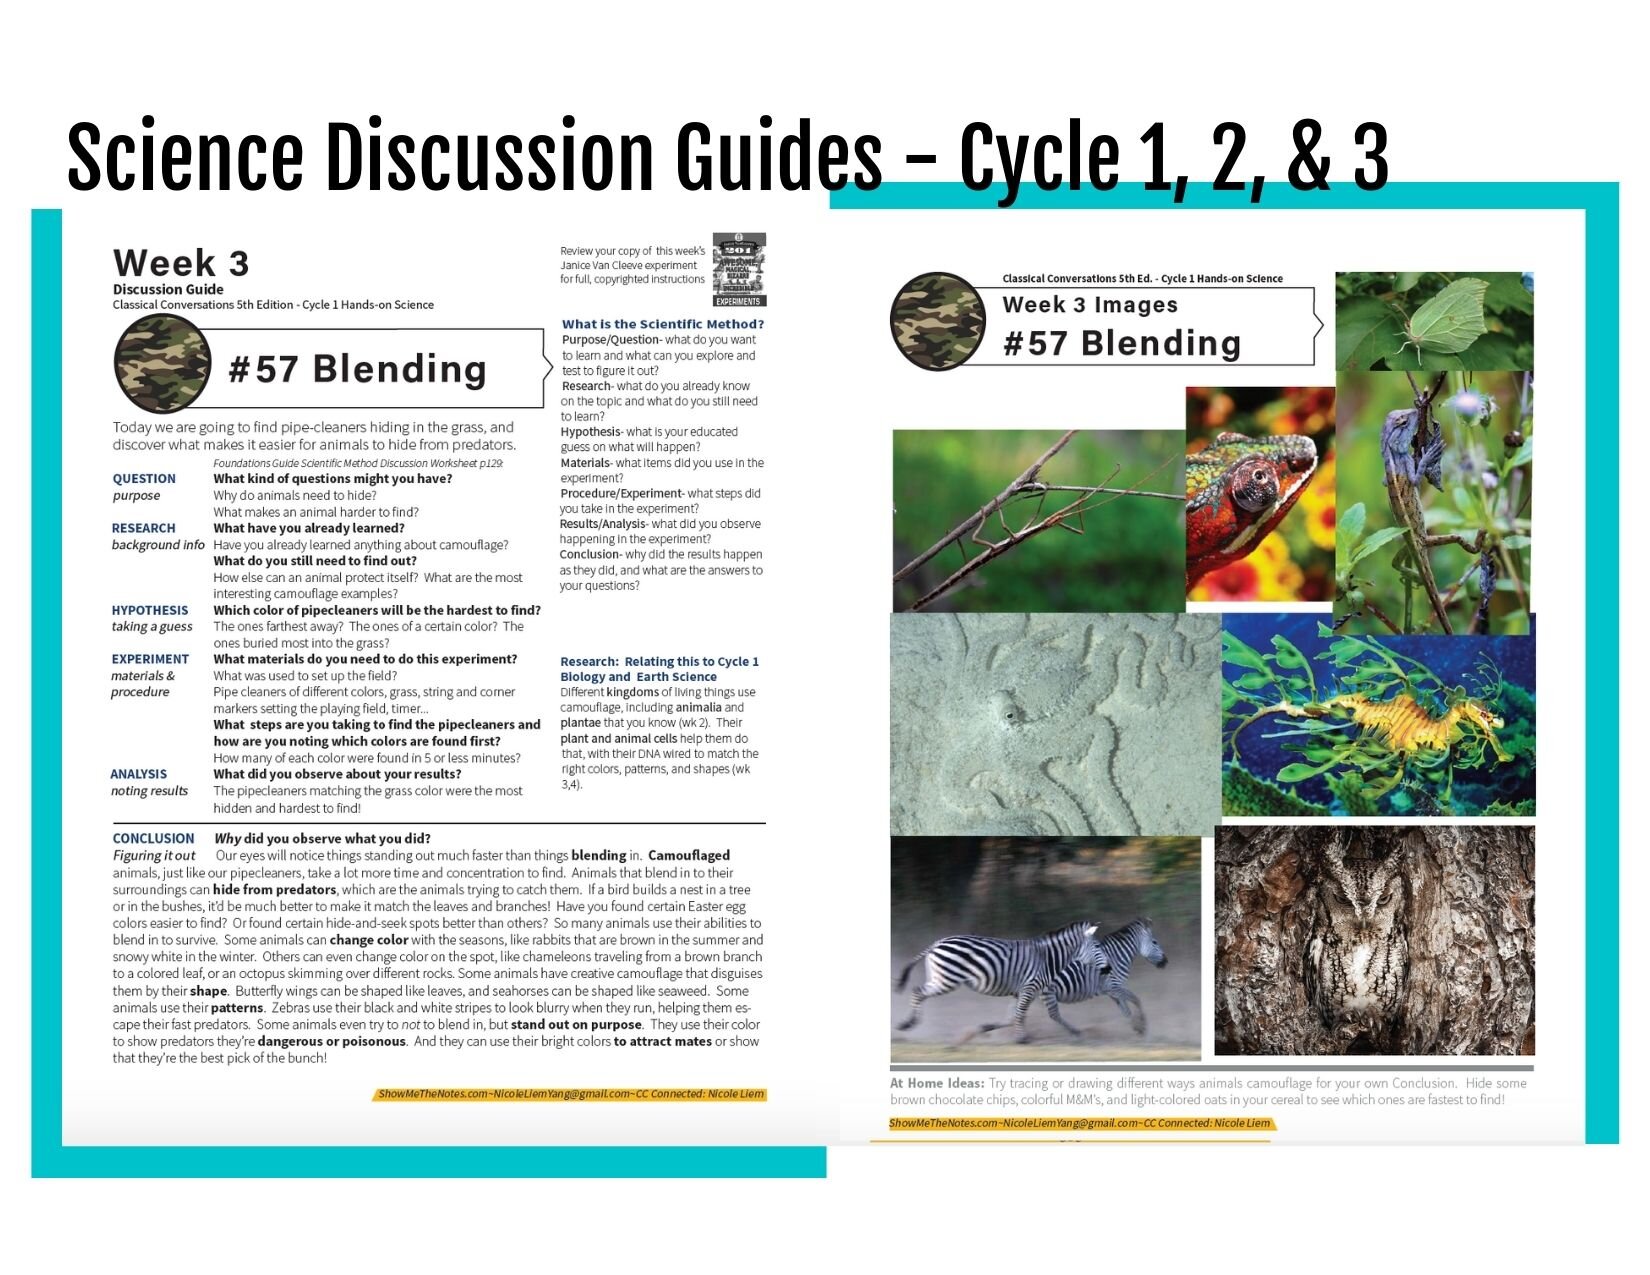 C1-2-3 Discussion Guides.jpg